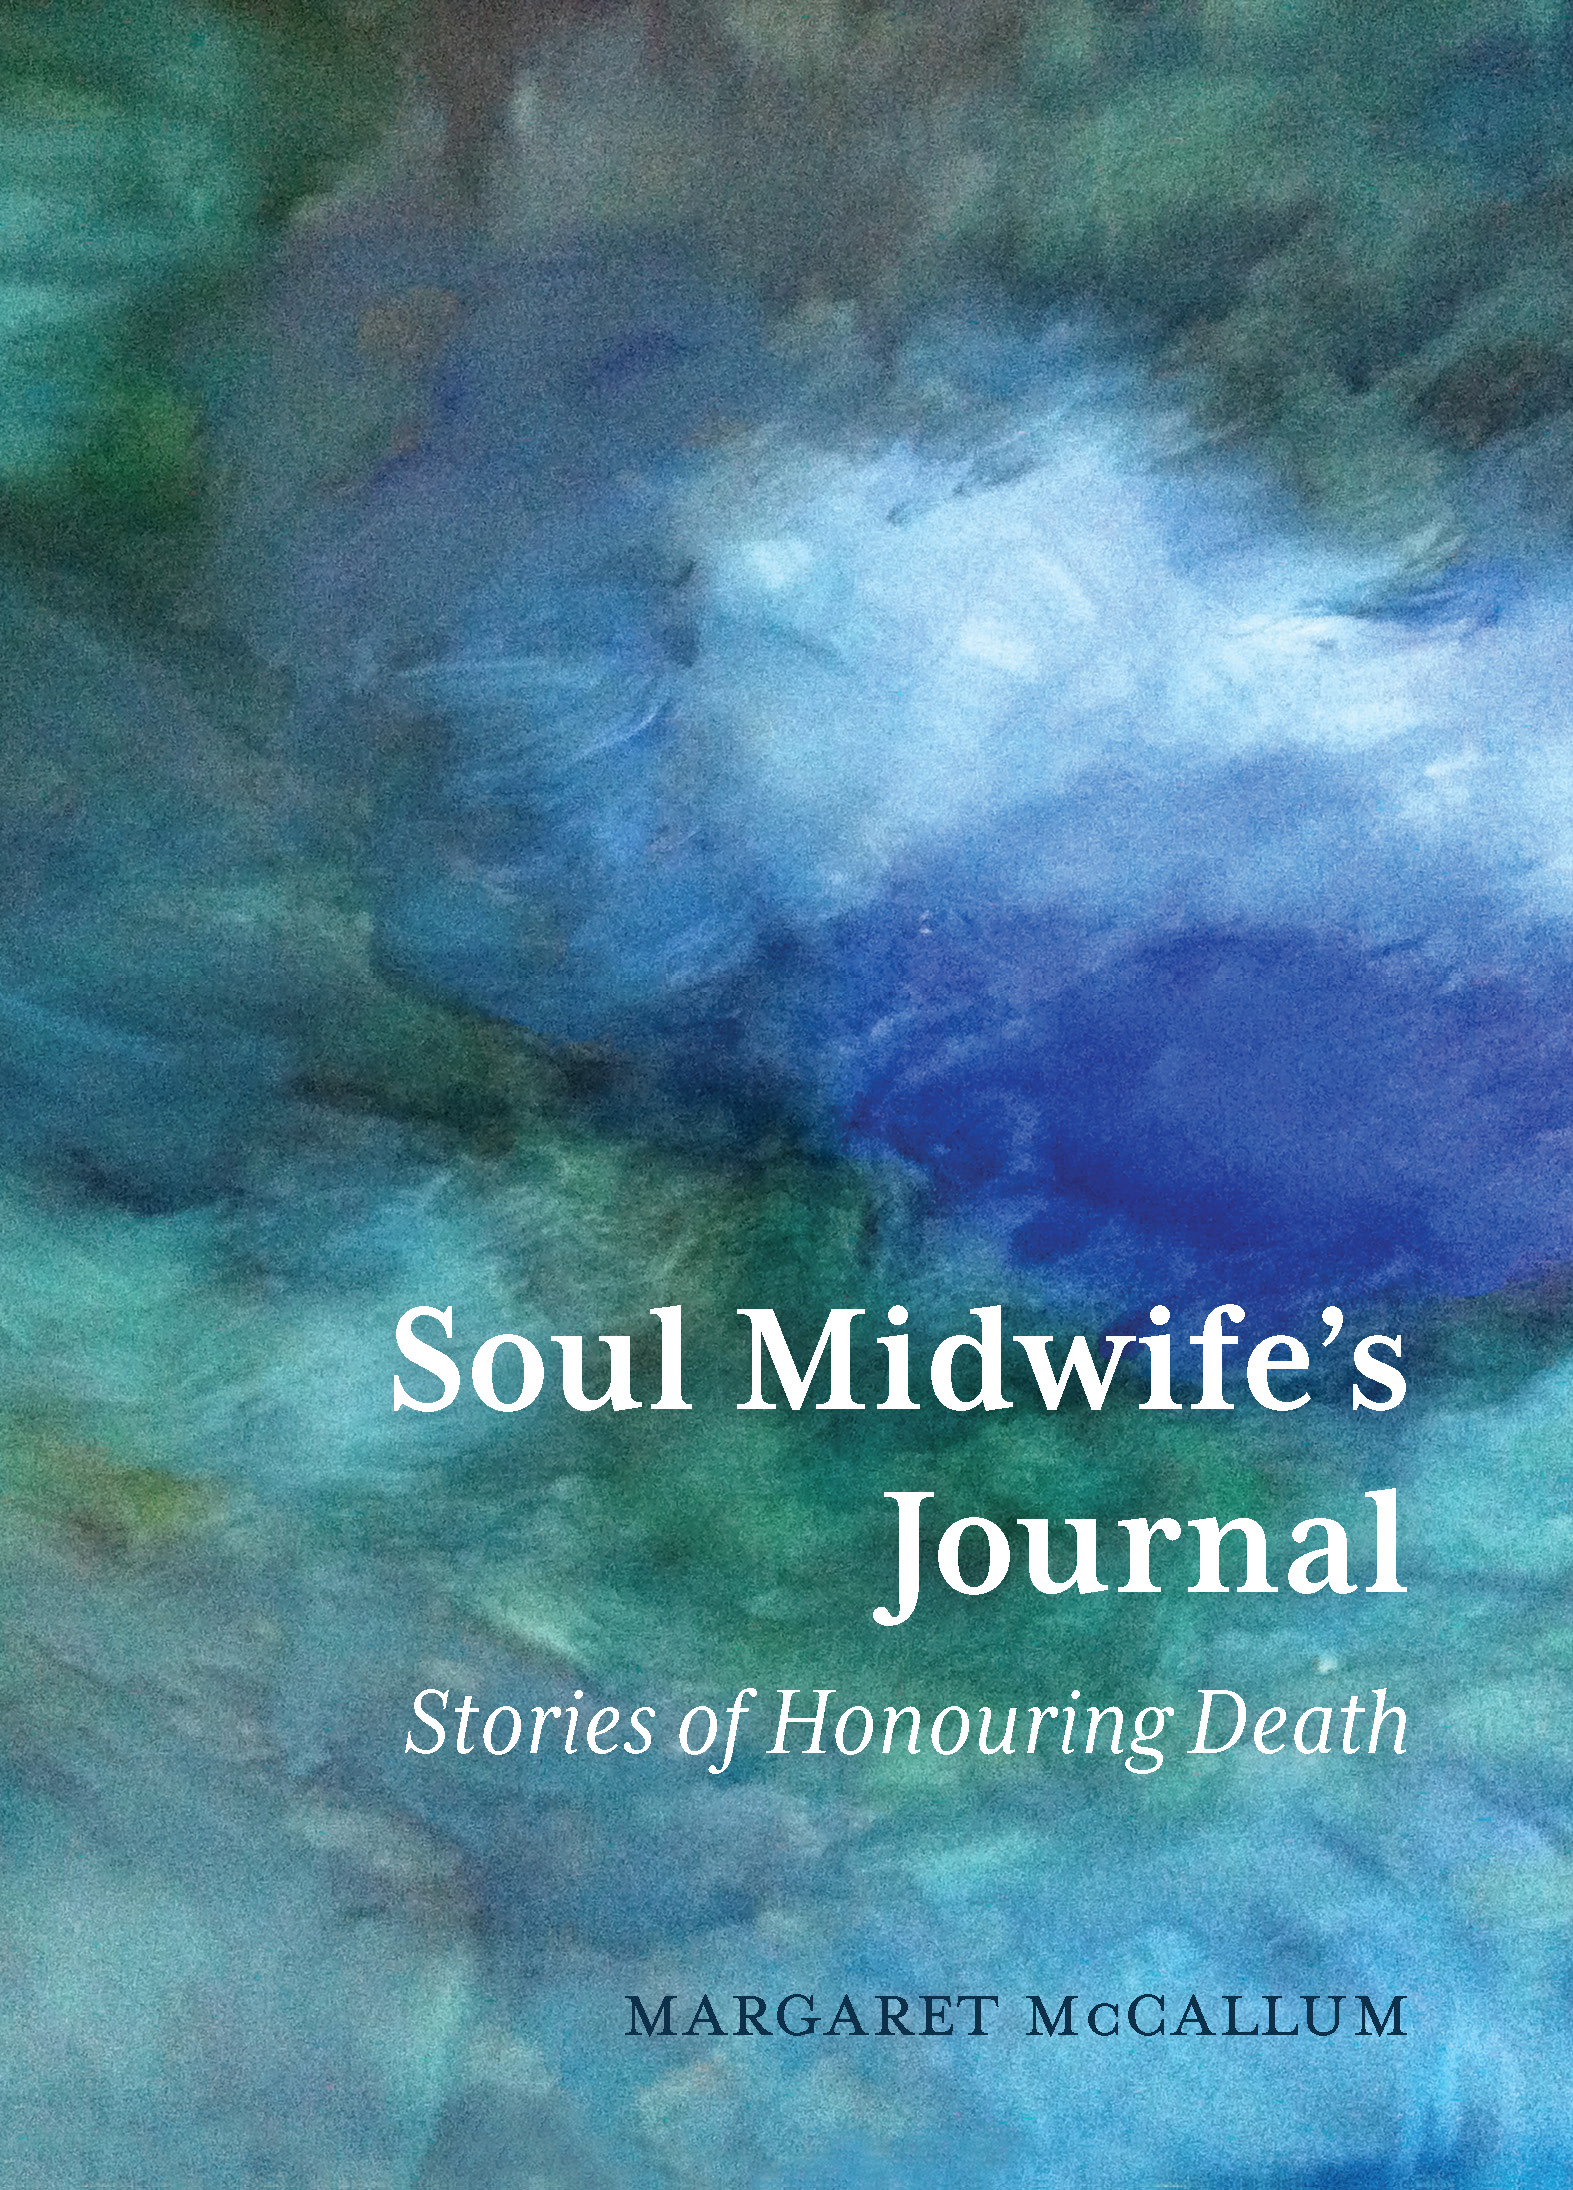 Soul Midwife's Journal<br><span style="text-transform:none;letter-spacing:0;font-style:italic">stories of honouring death</span>